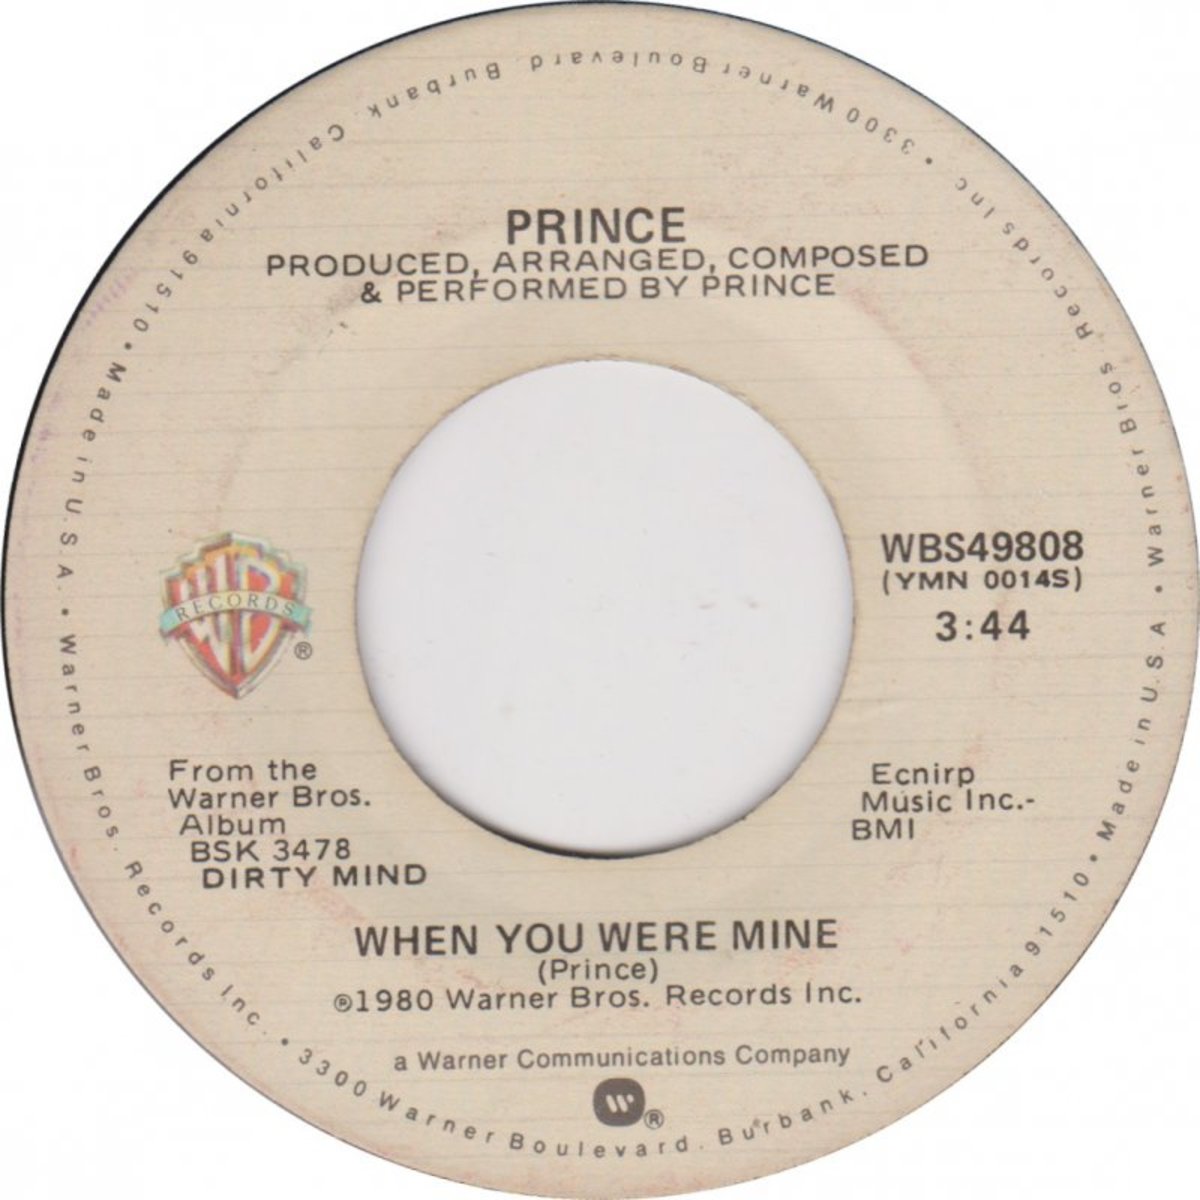 The B-side of the "Controversy" 45's U.S. release: "When You Were Mine"